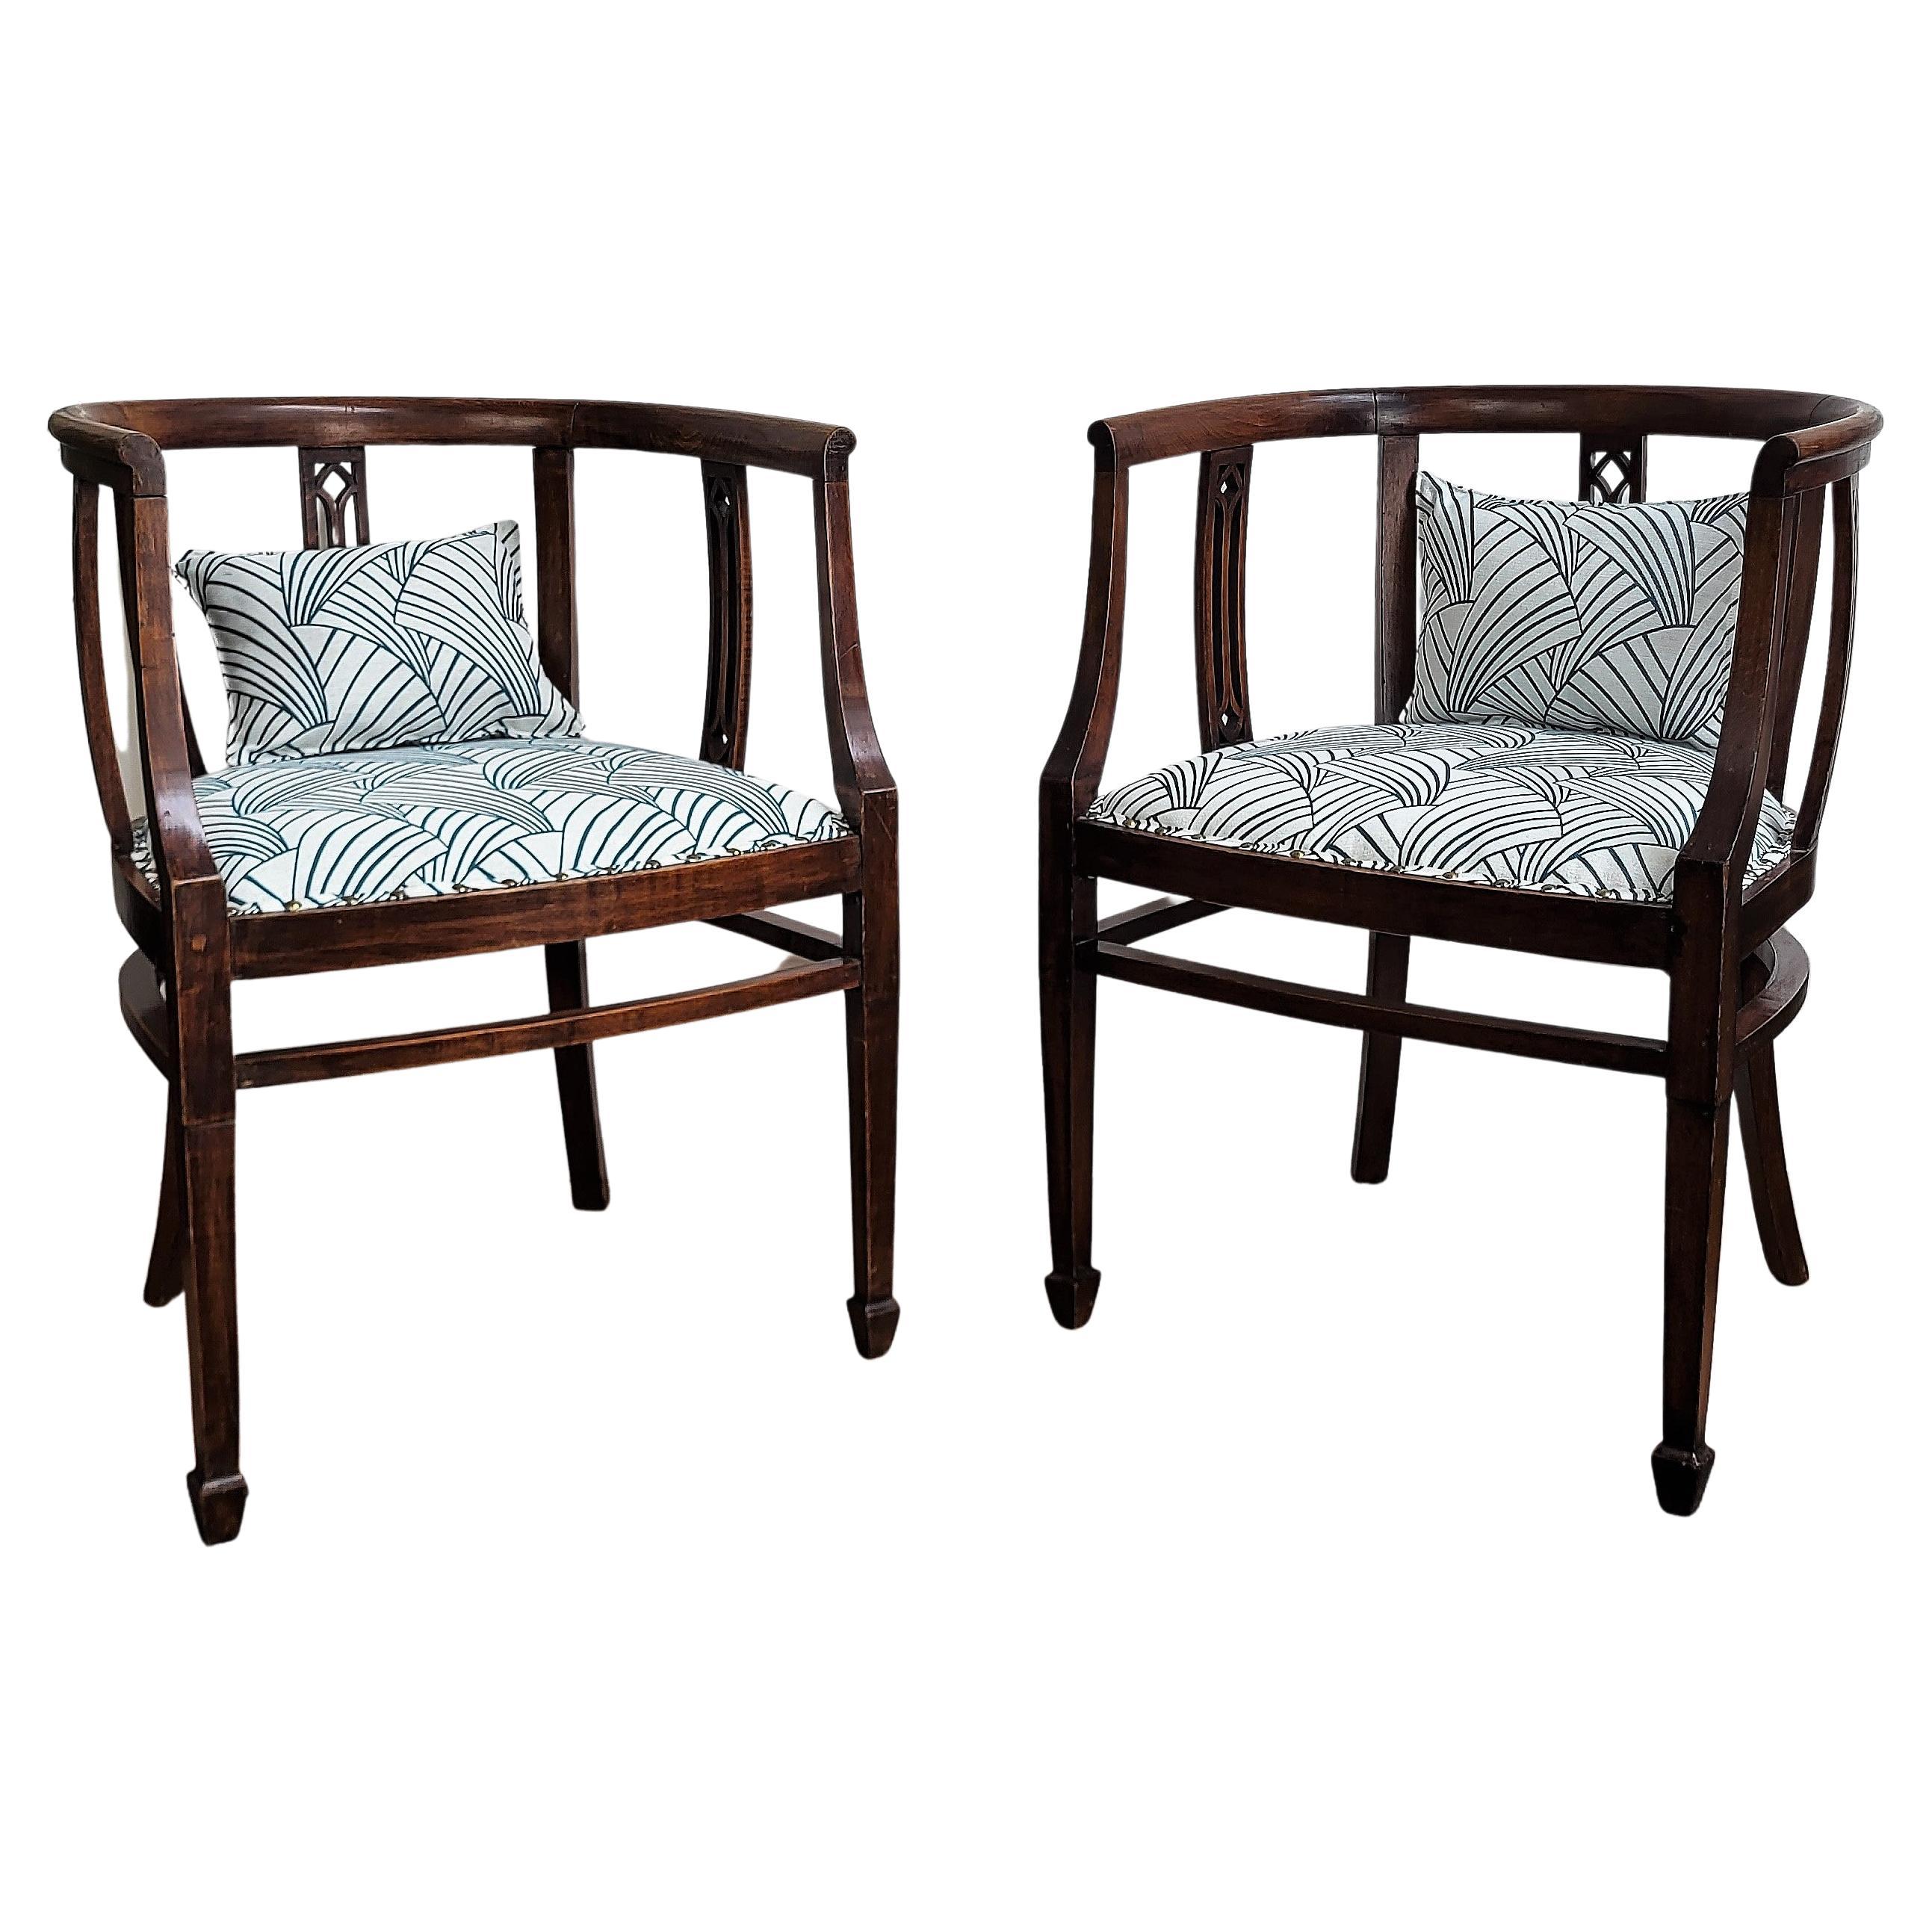 Pair of 20thCentury Italian Wooden Carved Upholstered Chairs